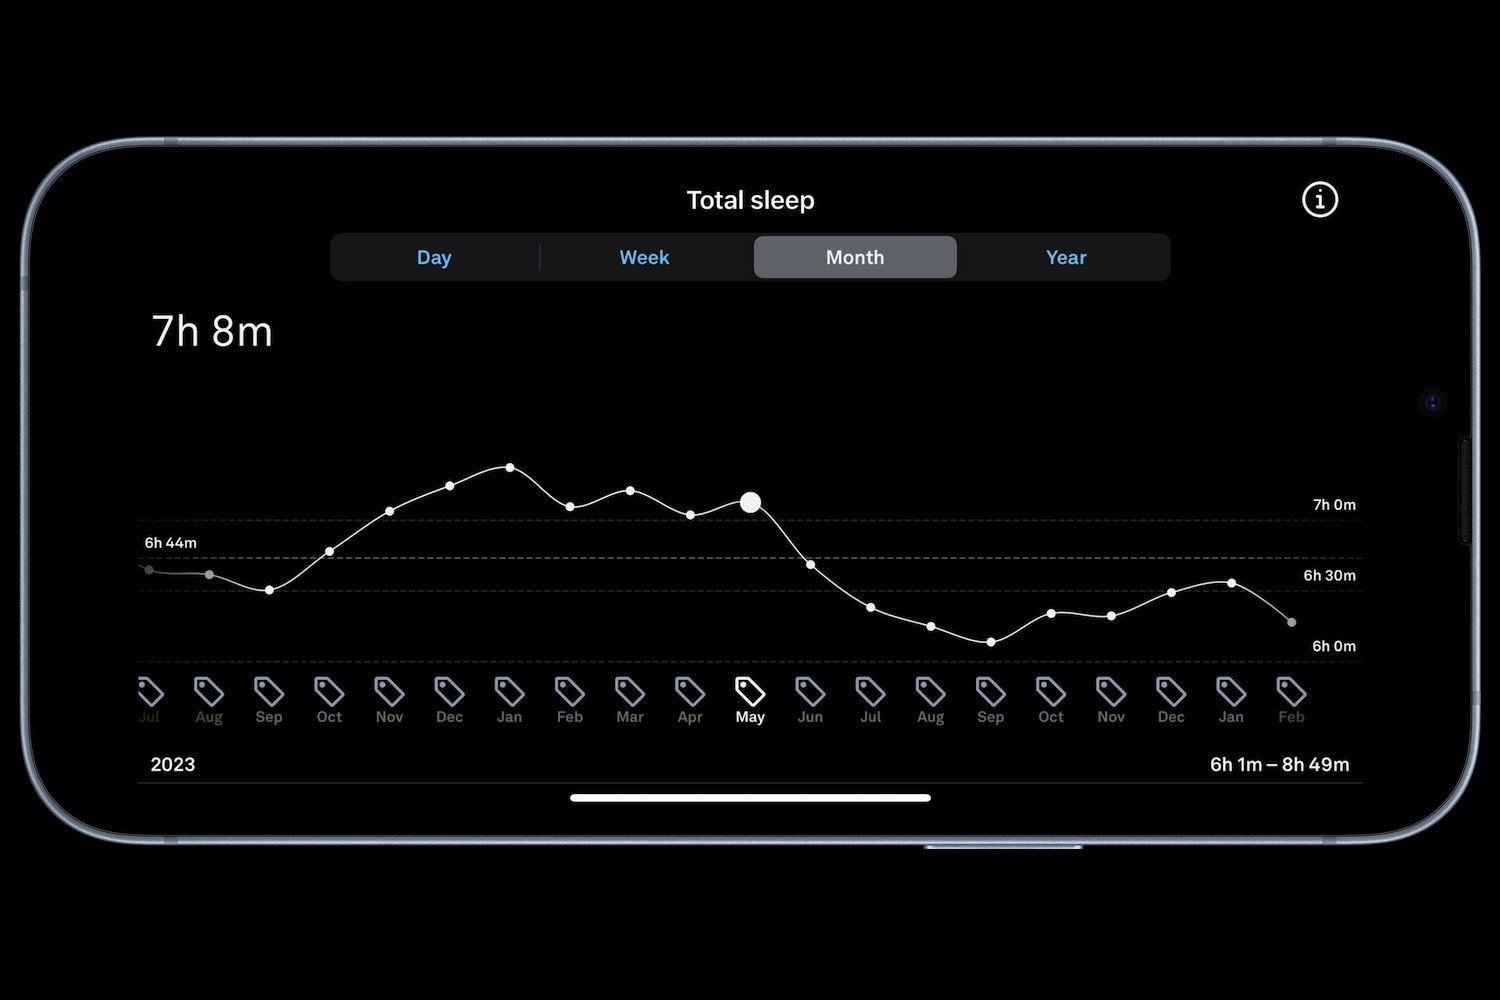 A screenshot from the Oura Ring app showing sleep data over six months.